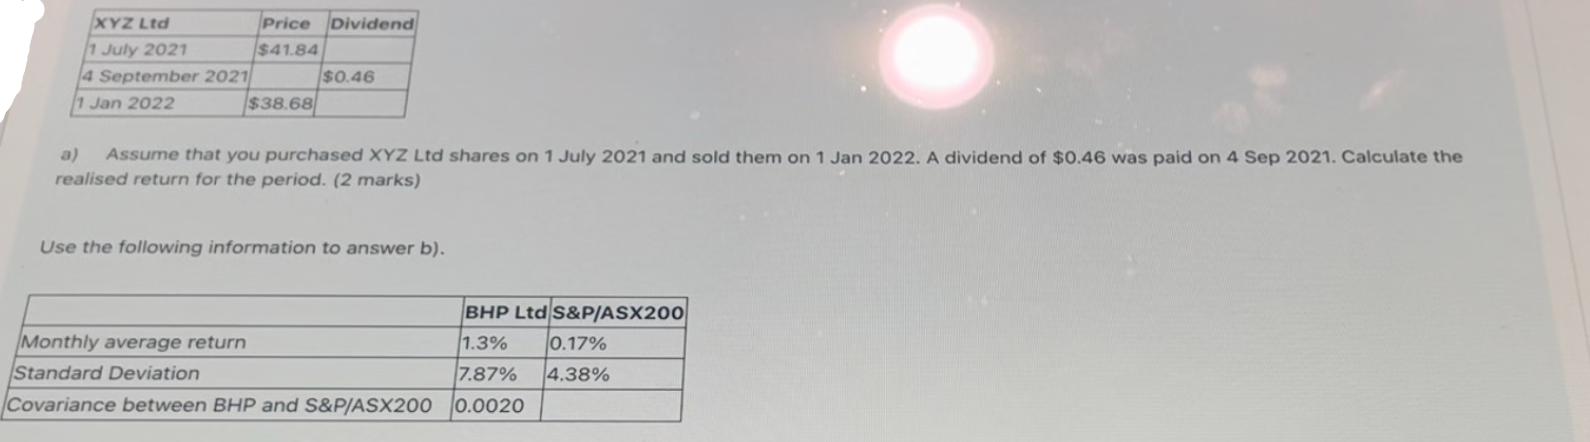 XYZ Ltd 1 July 2021 4 September 2021 1 Jan 2022 Price Dividend $41.84 $38.68 $0.46 Assume that you purchased